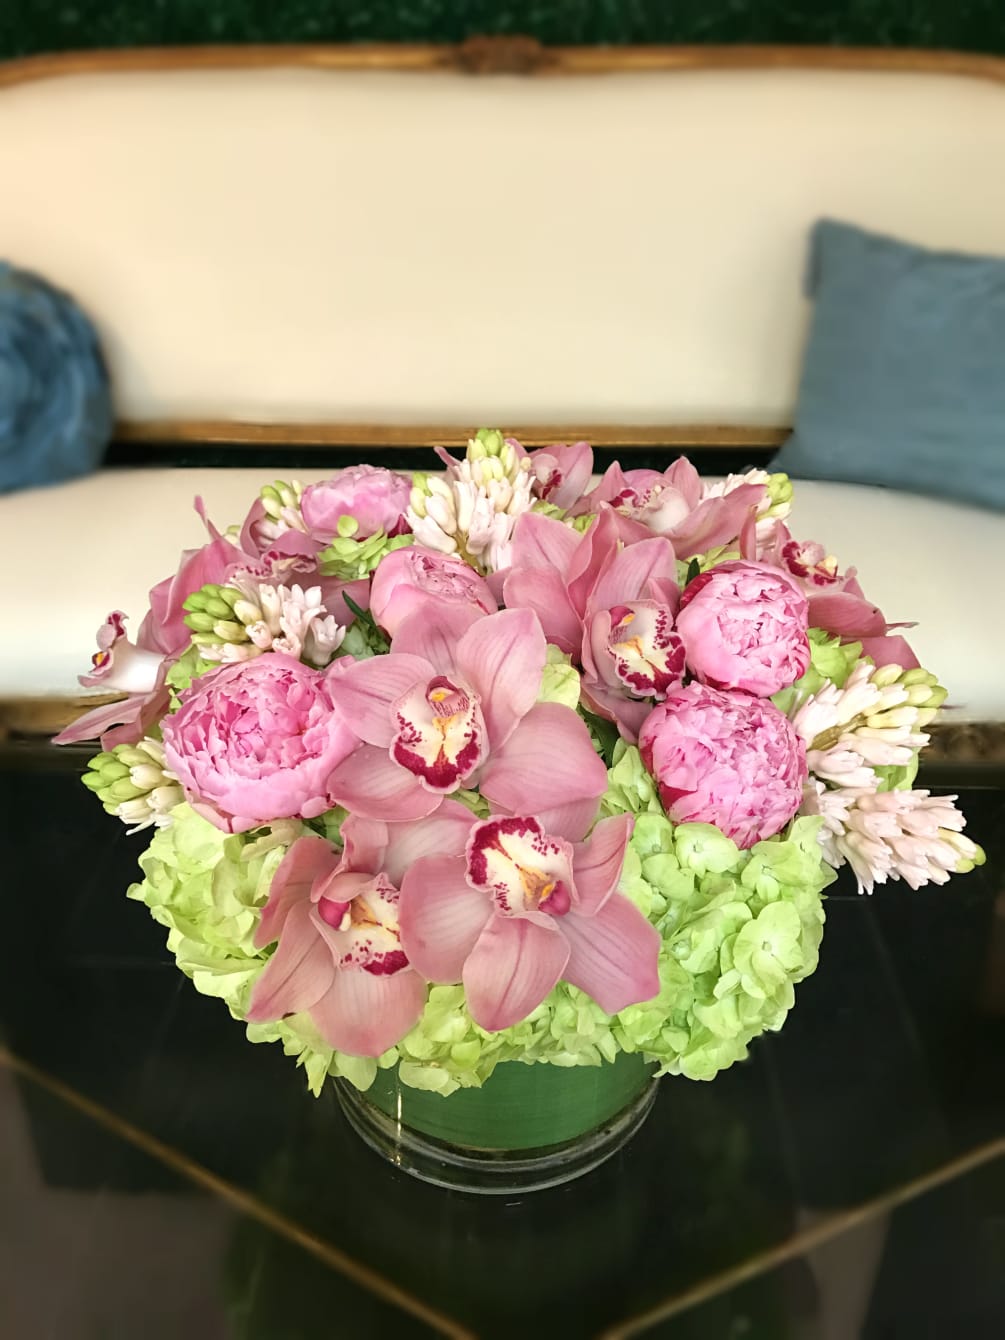 The perfect duo of orchids and peonies on a bed of hydgrangeas